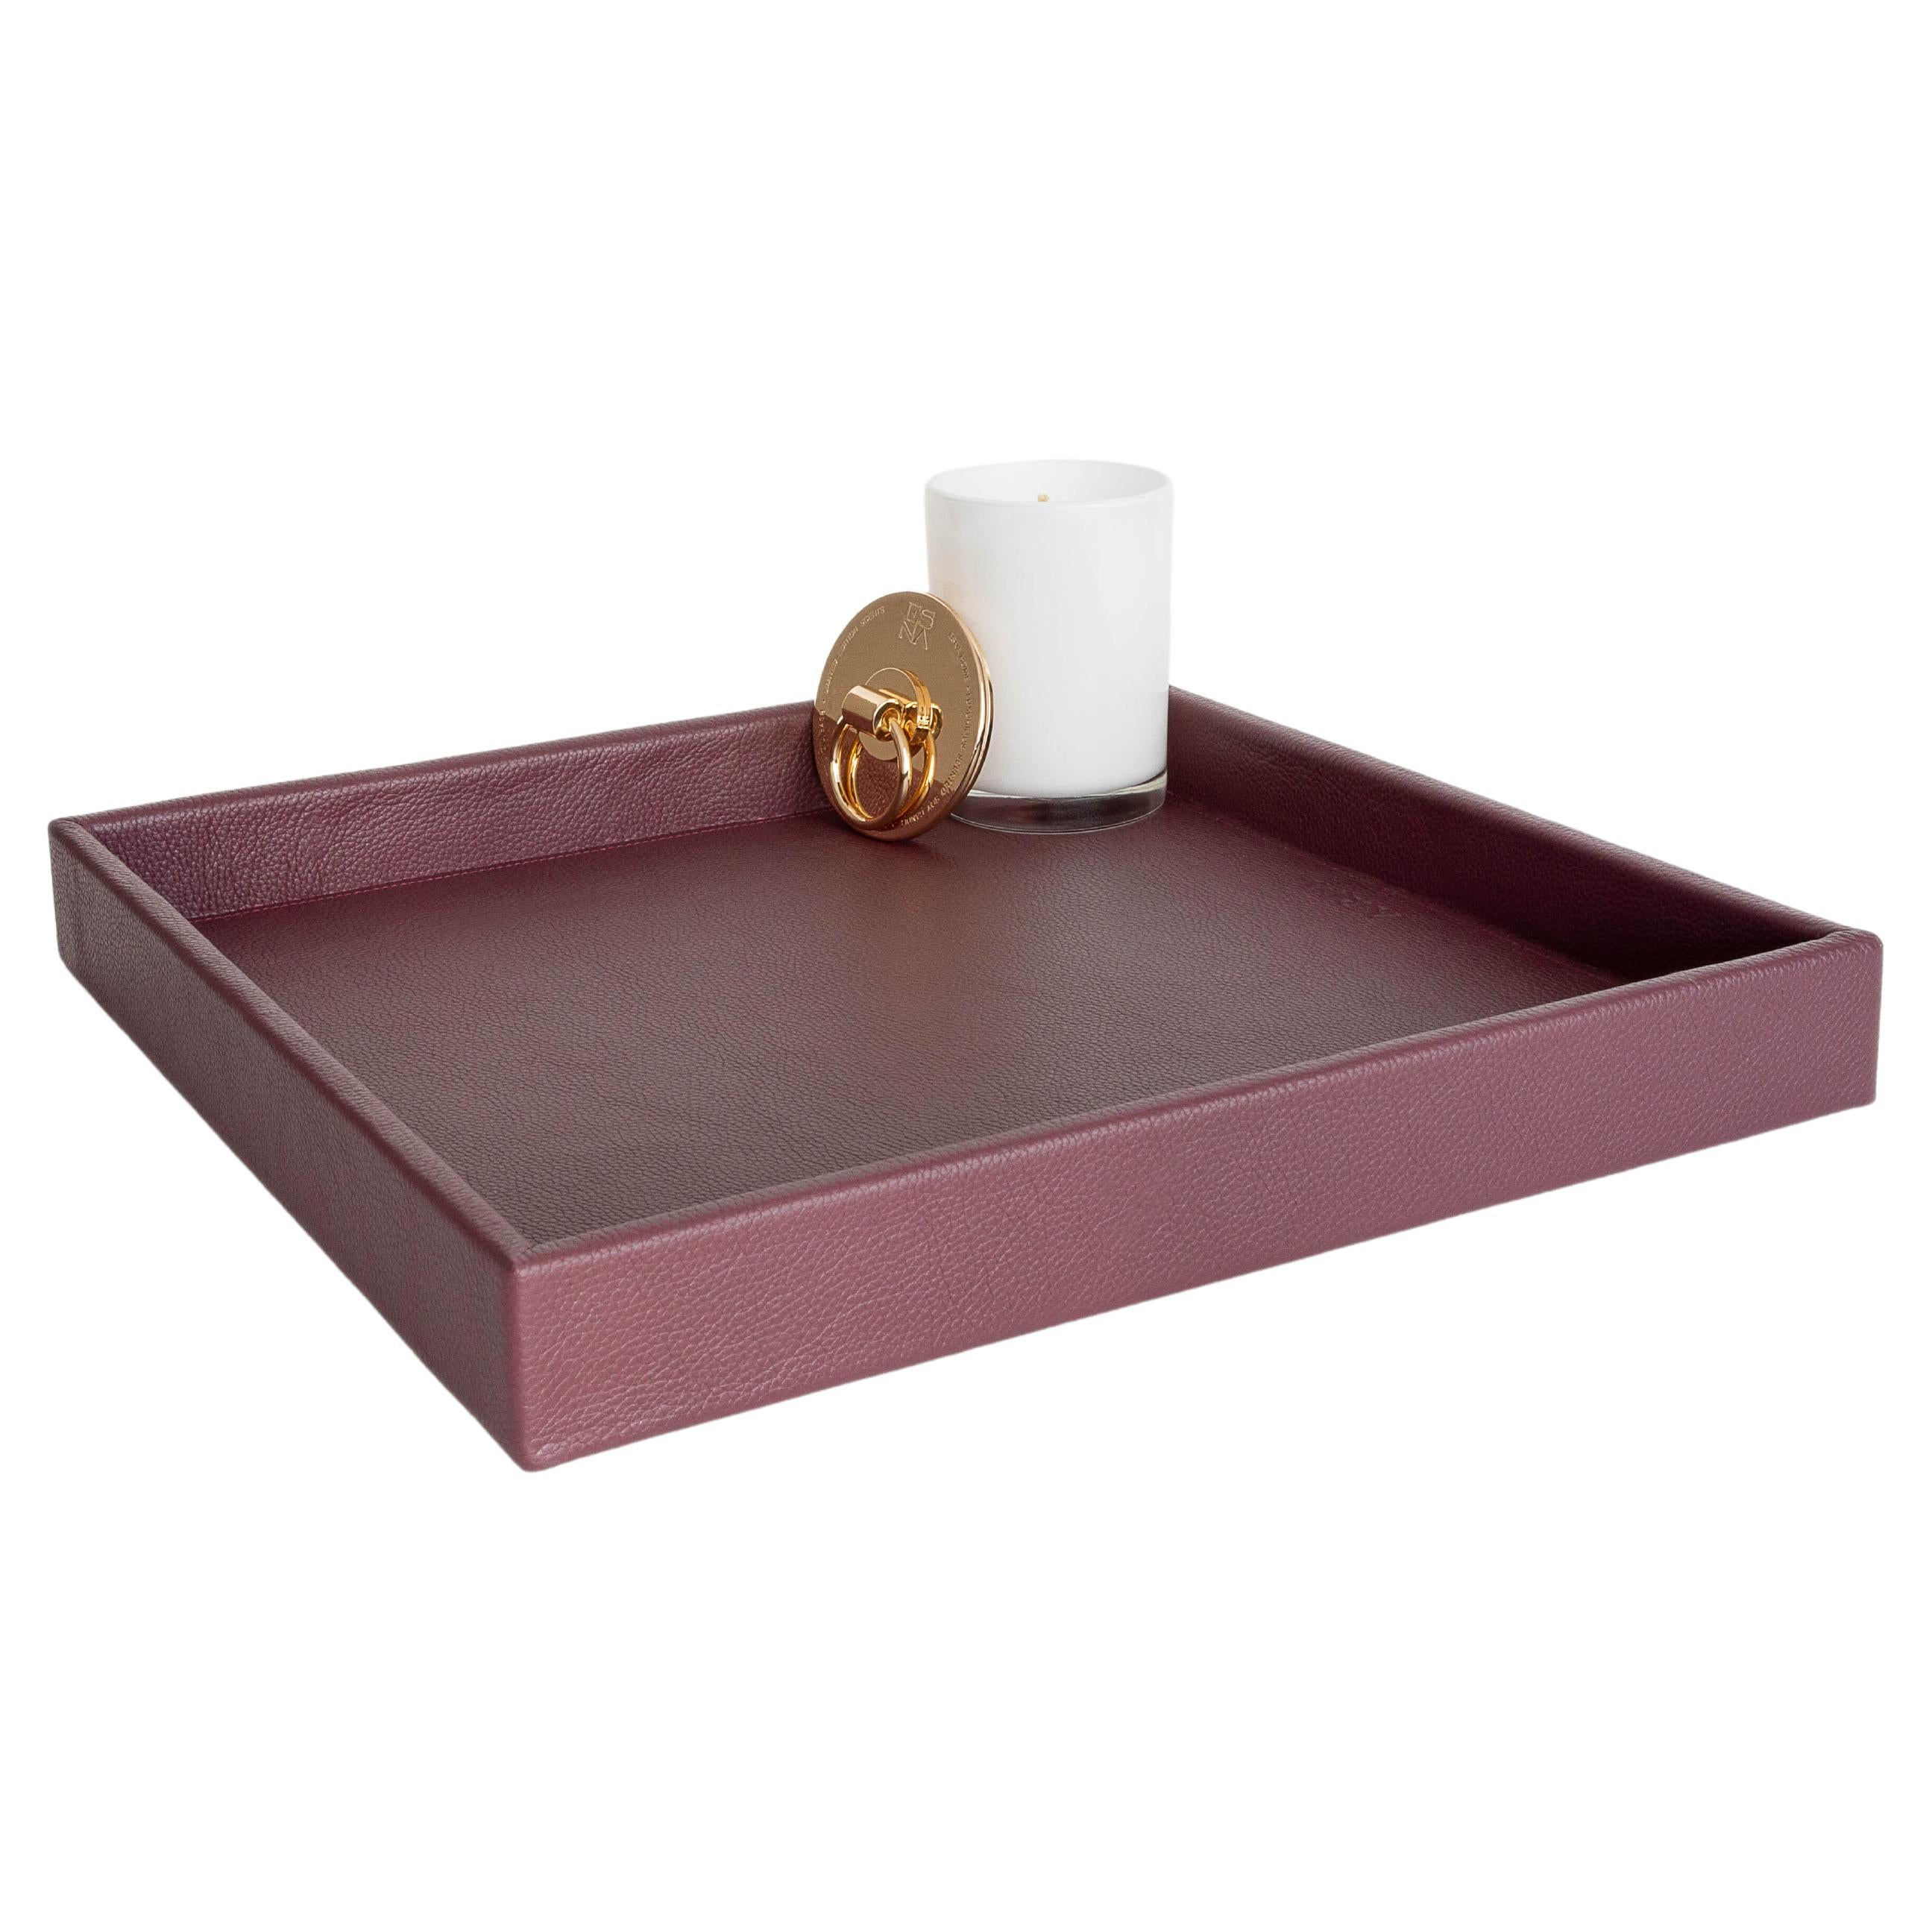 Leather Tray, Large A Square Tray, Handmade in Brazil - Color: Wine For Sale